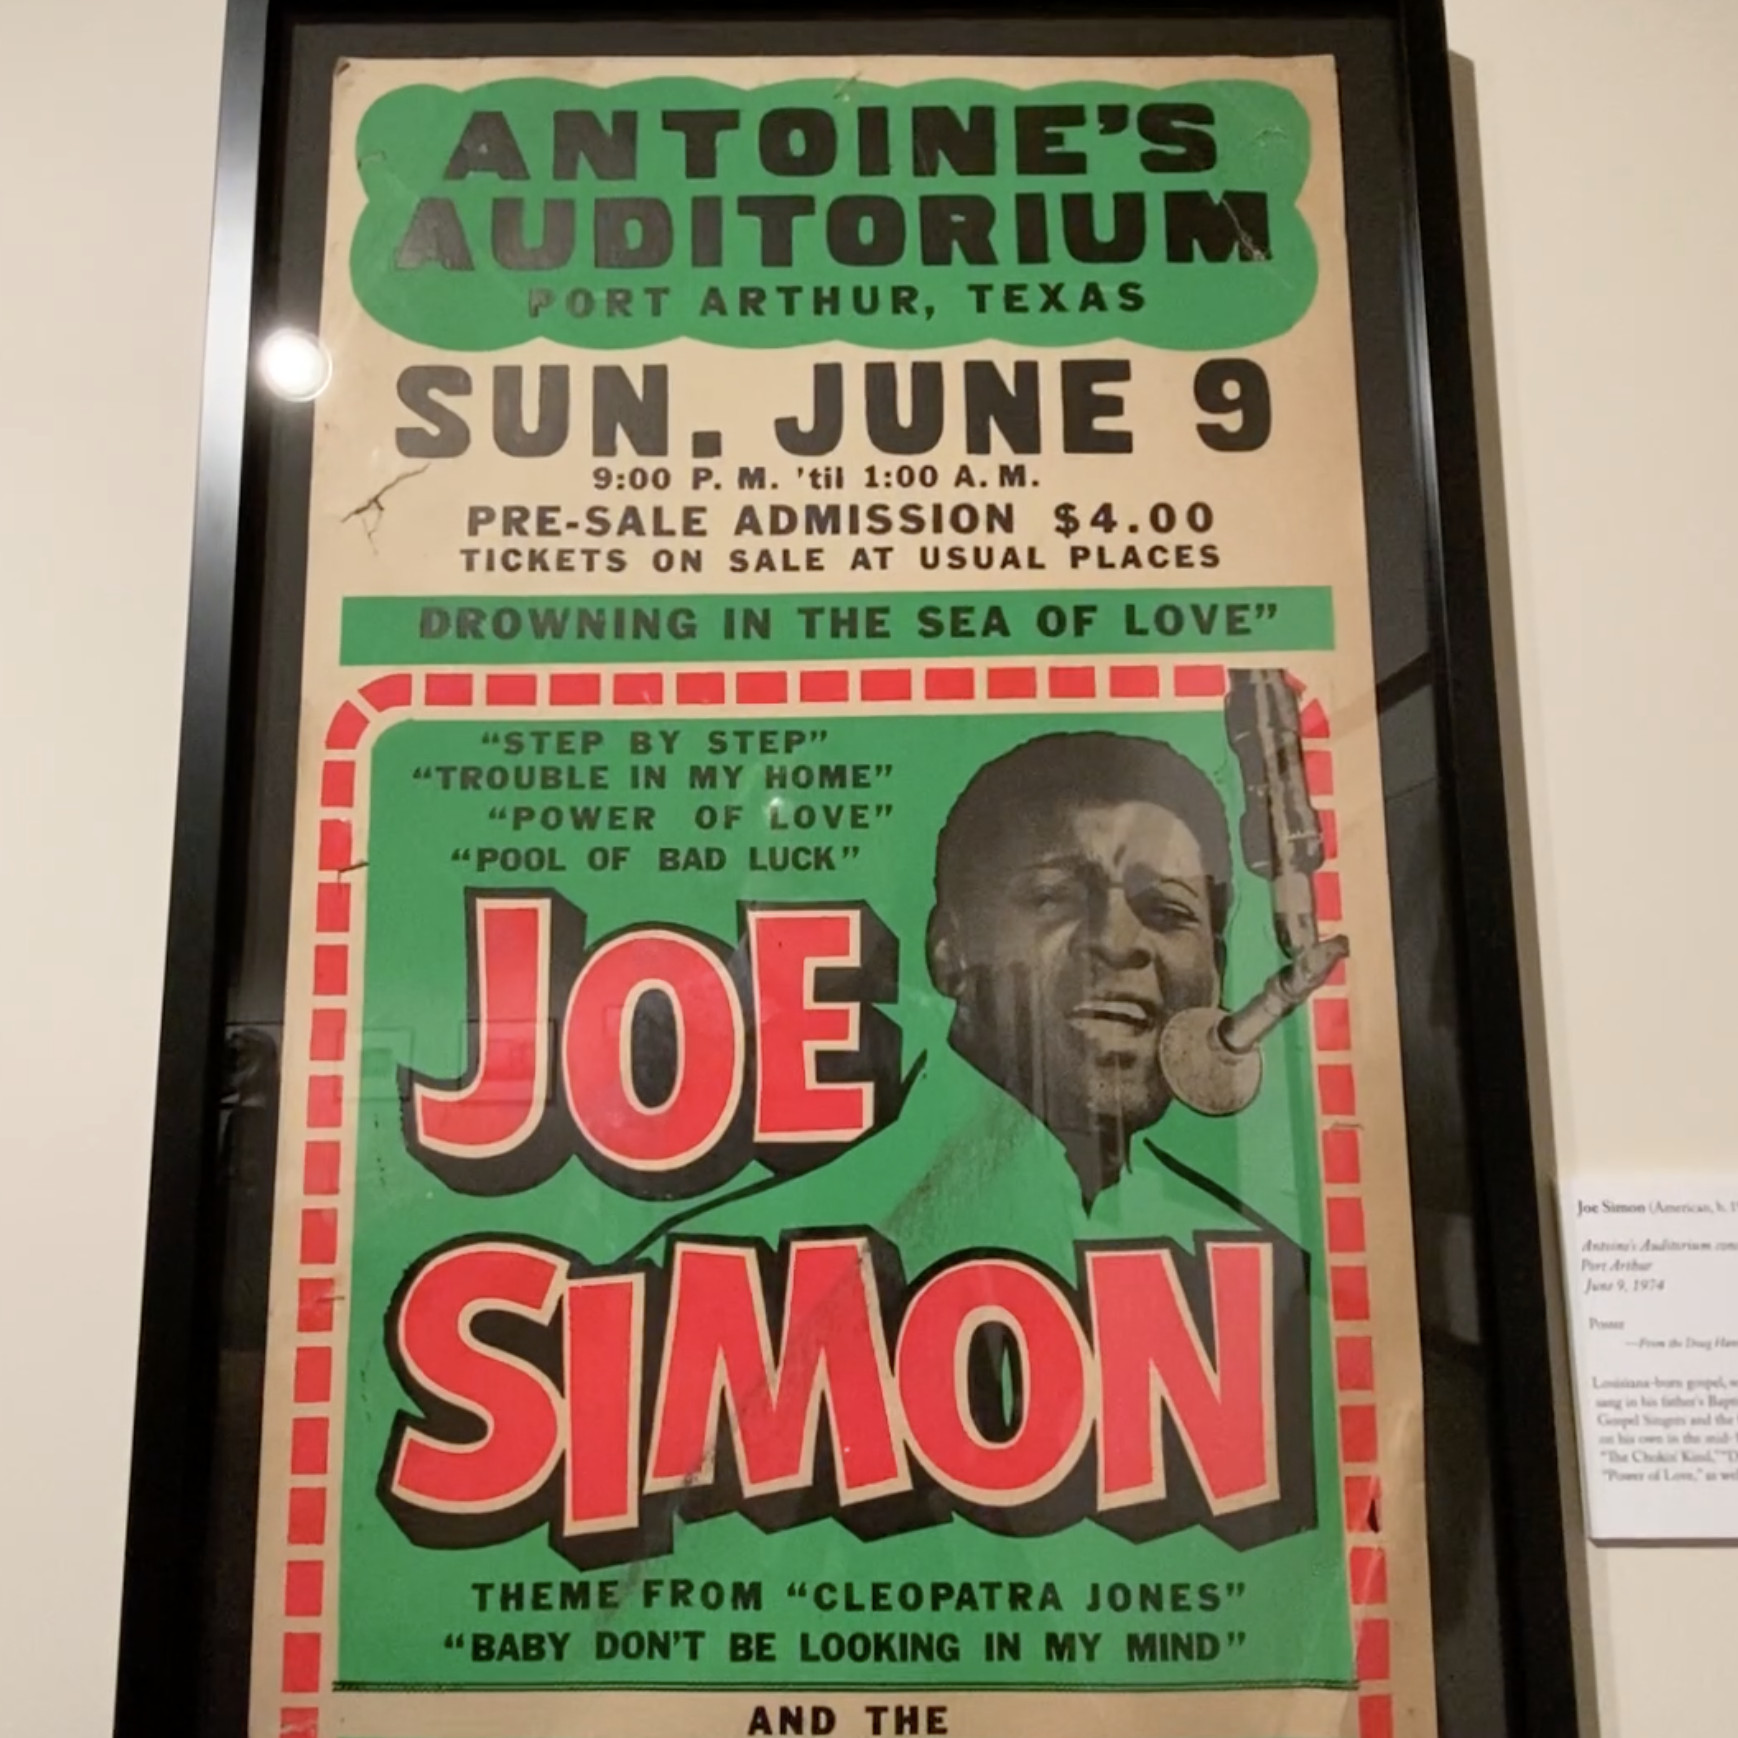 Photo of concert poster from Texas Music Collection